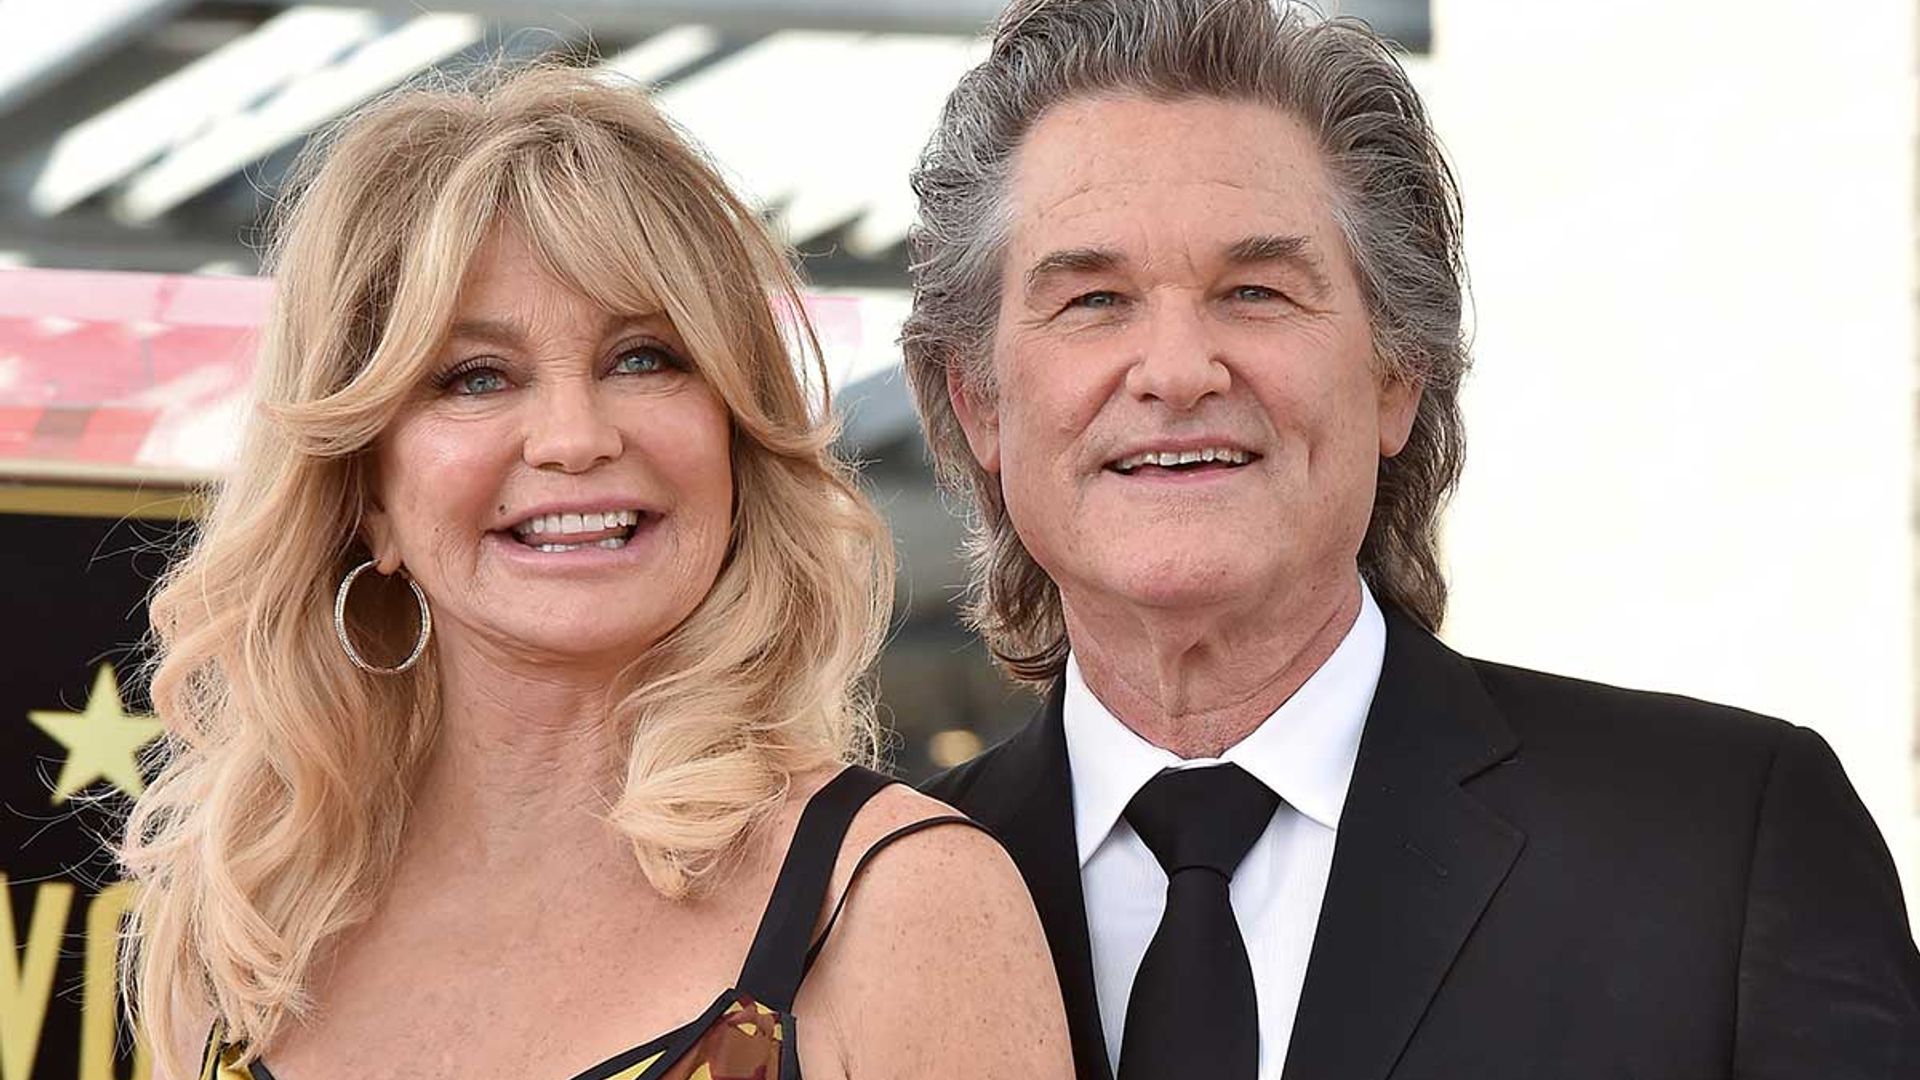 goldie hawn and kurt russell